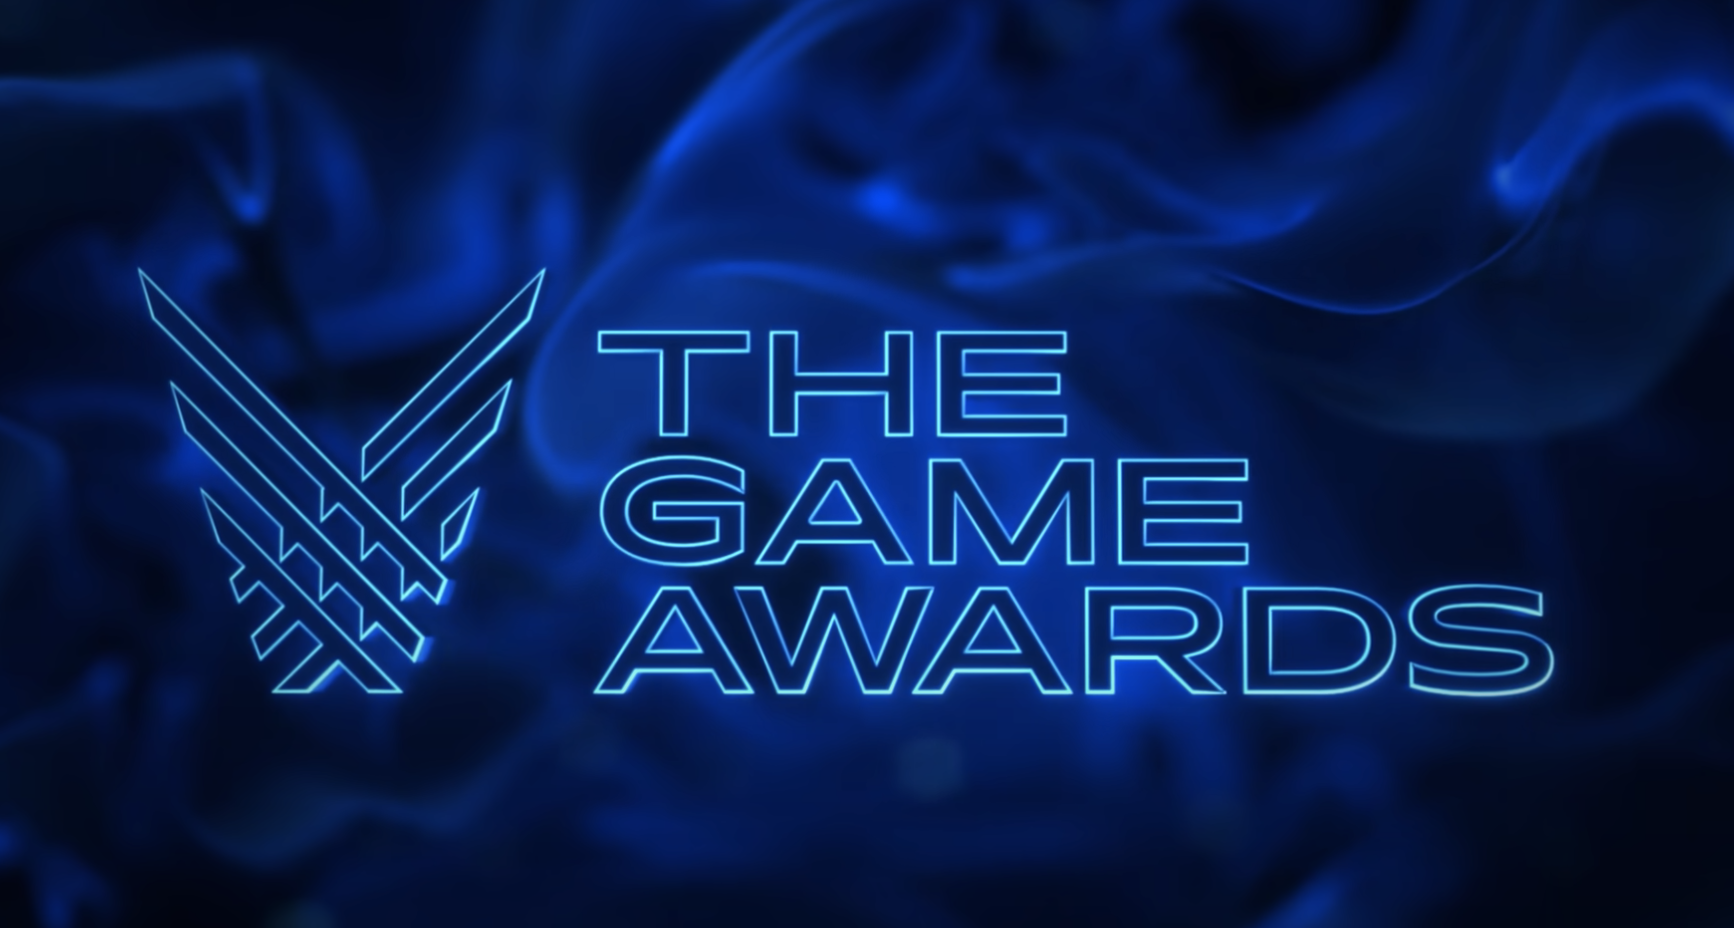 The Game Awards 2021 Nominees - The Game Of The Year 2021 